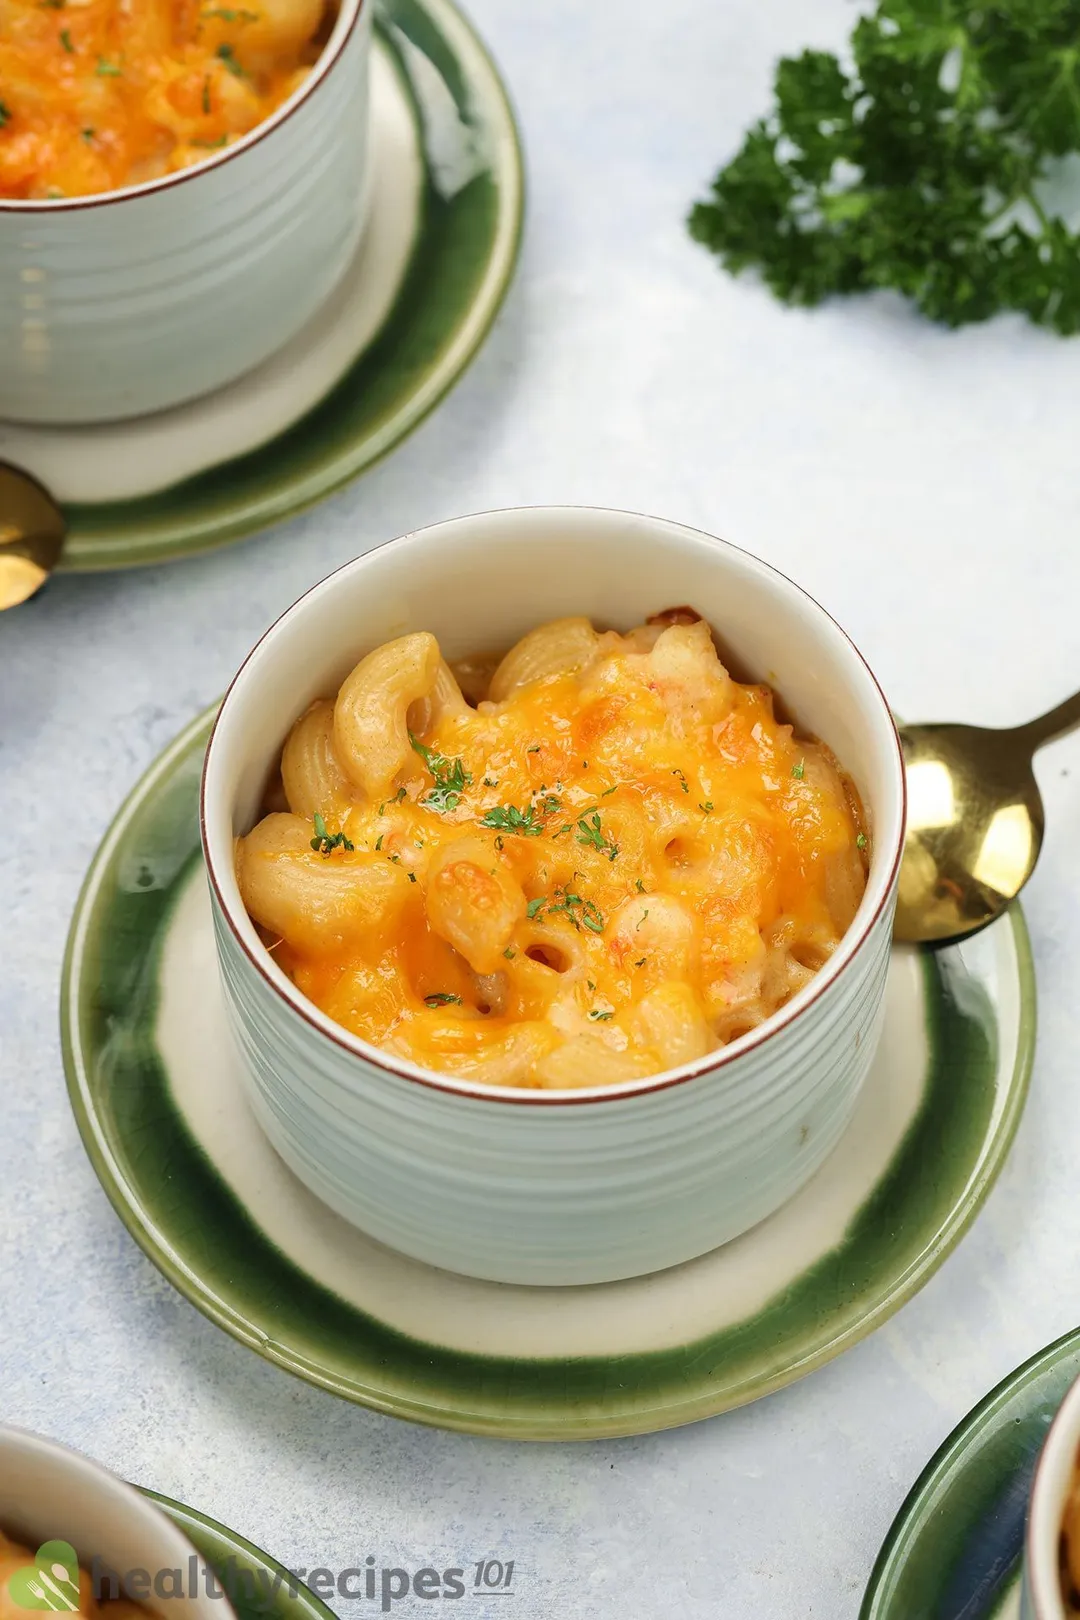 What Makes This Mac and Cheese Shrimp Healthy